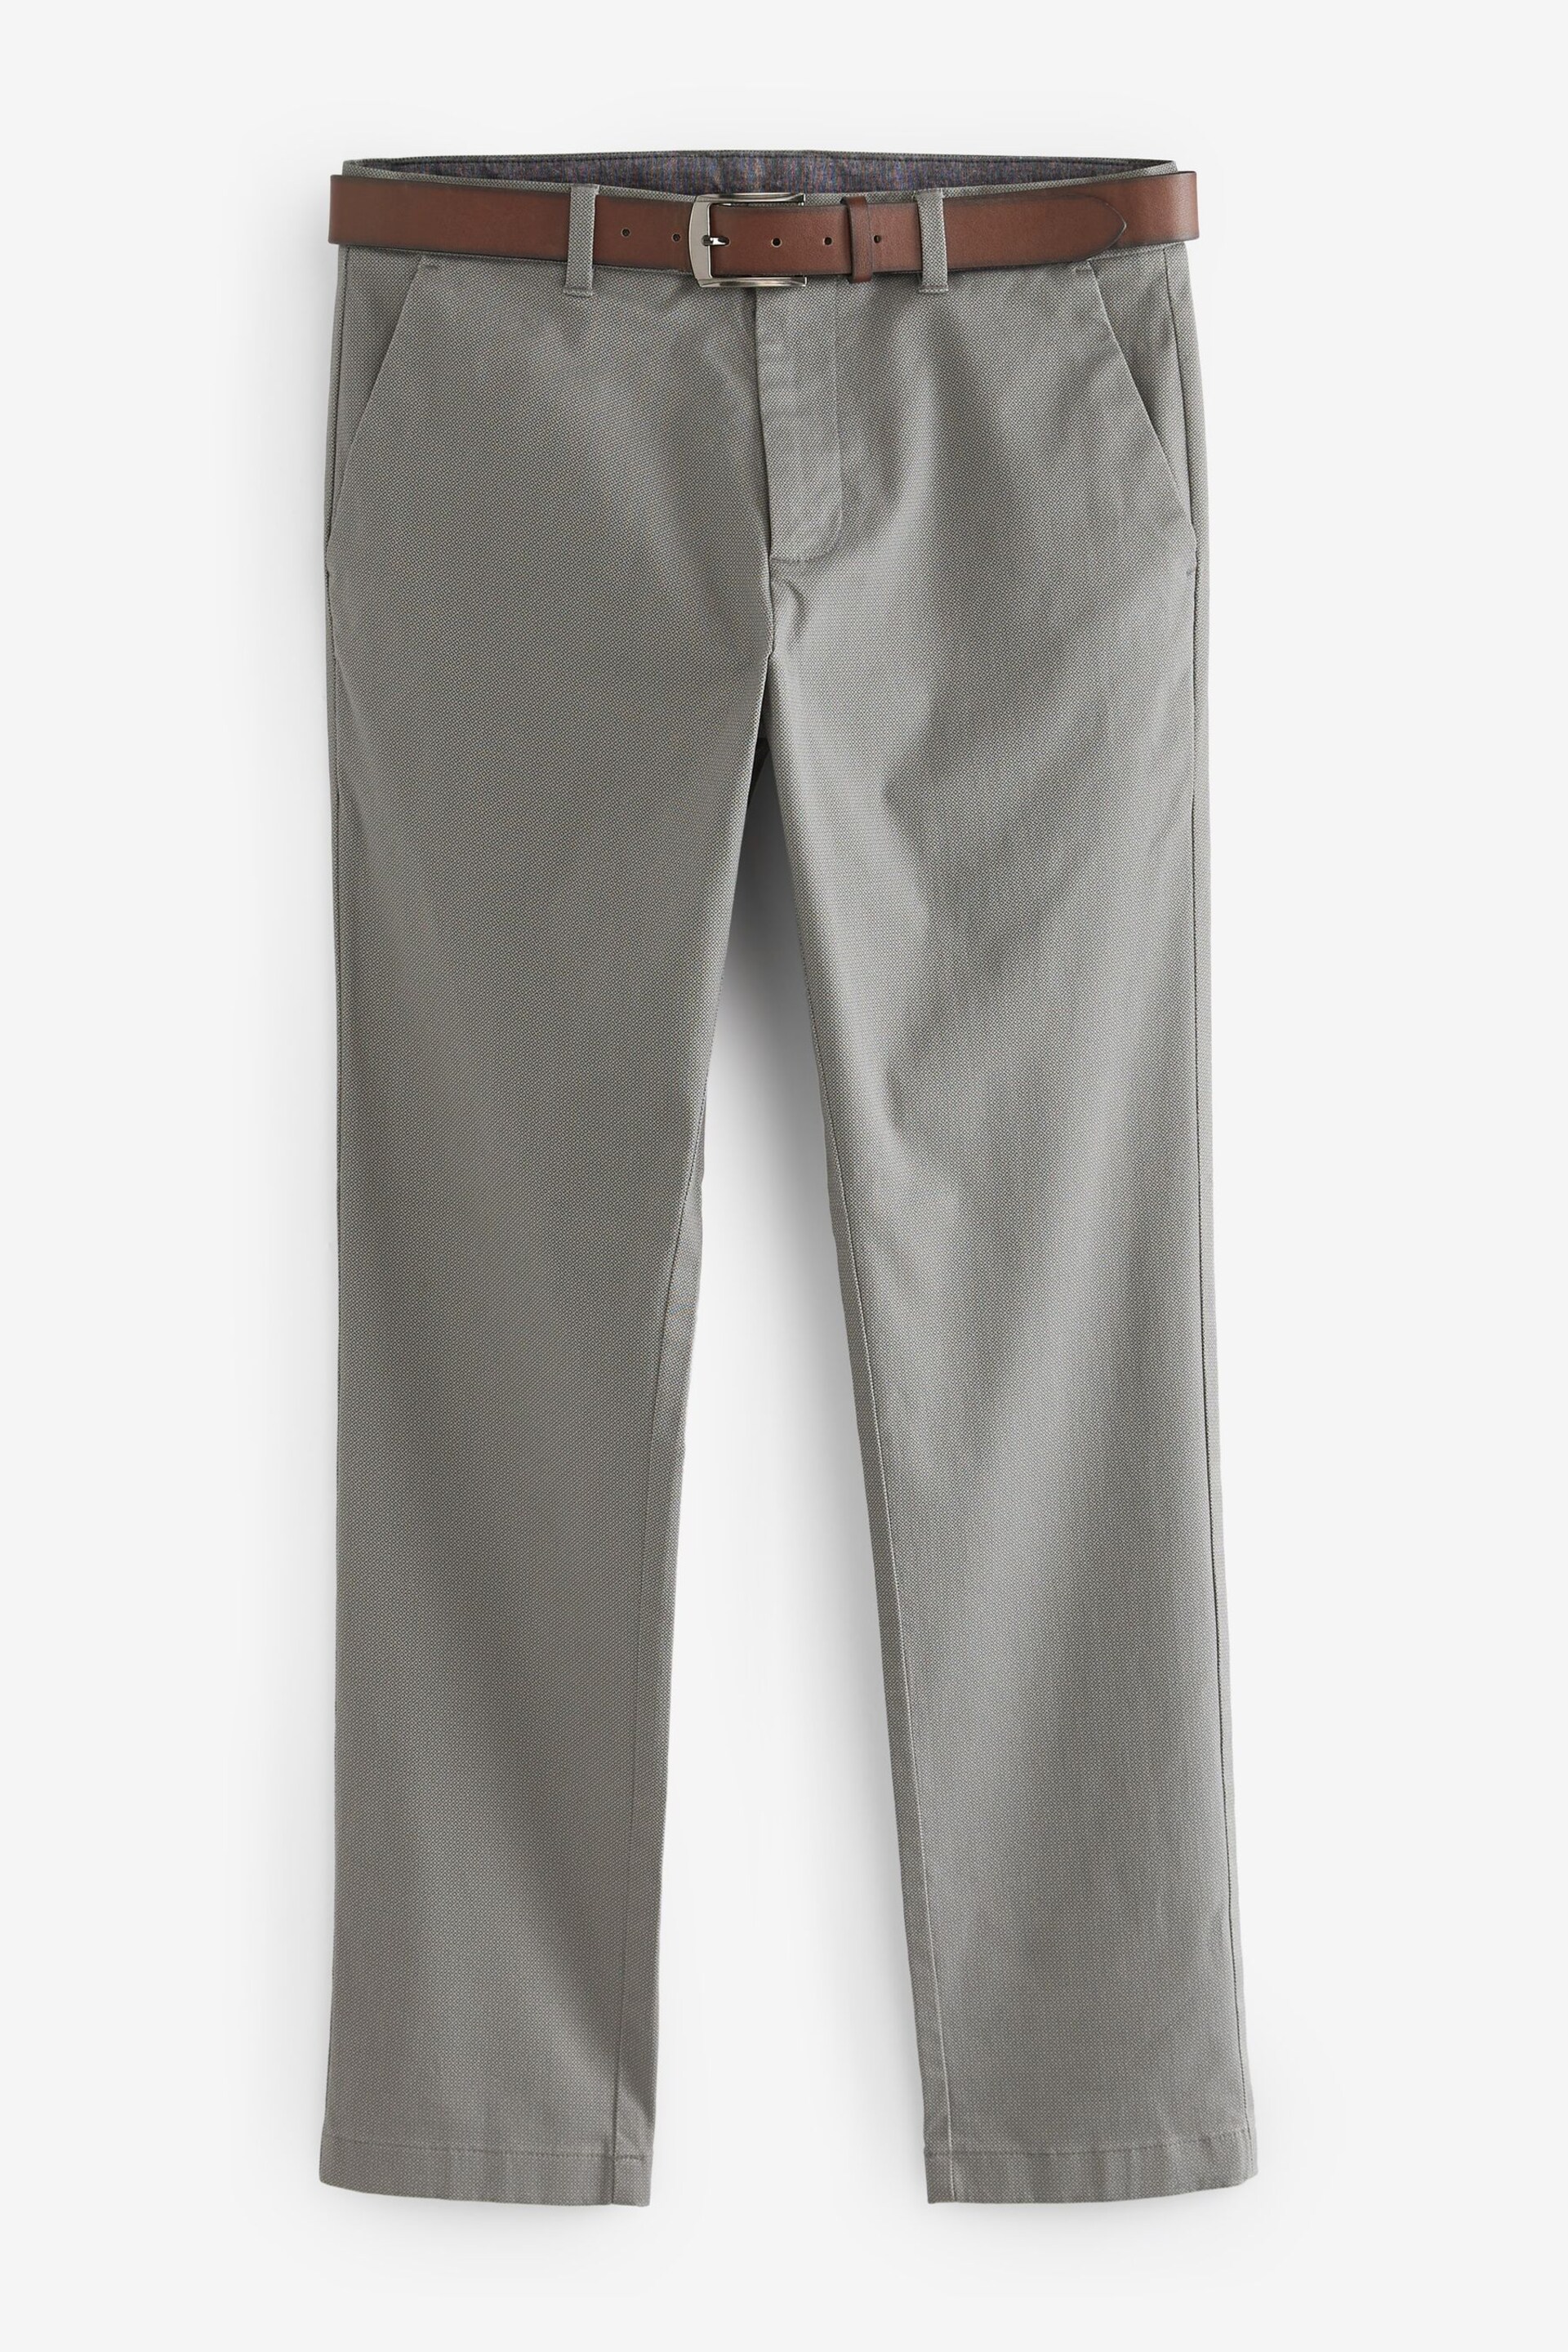 Grey Slim Printed Belted Soft Touch Chino Trousers - Image 4 of 9